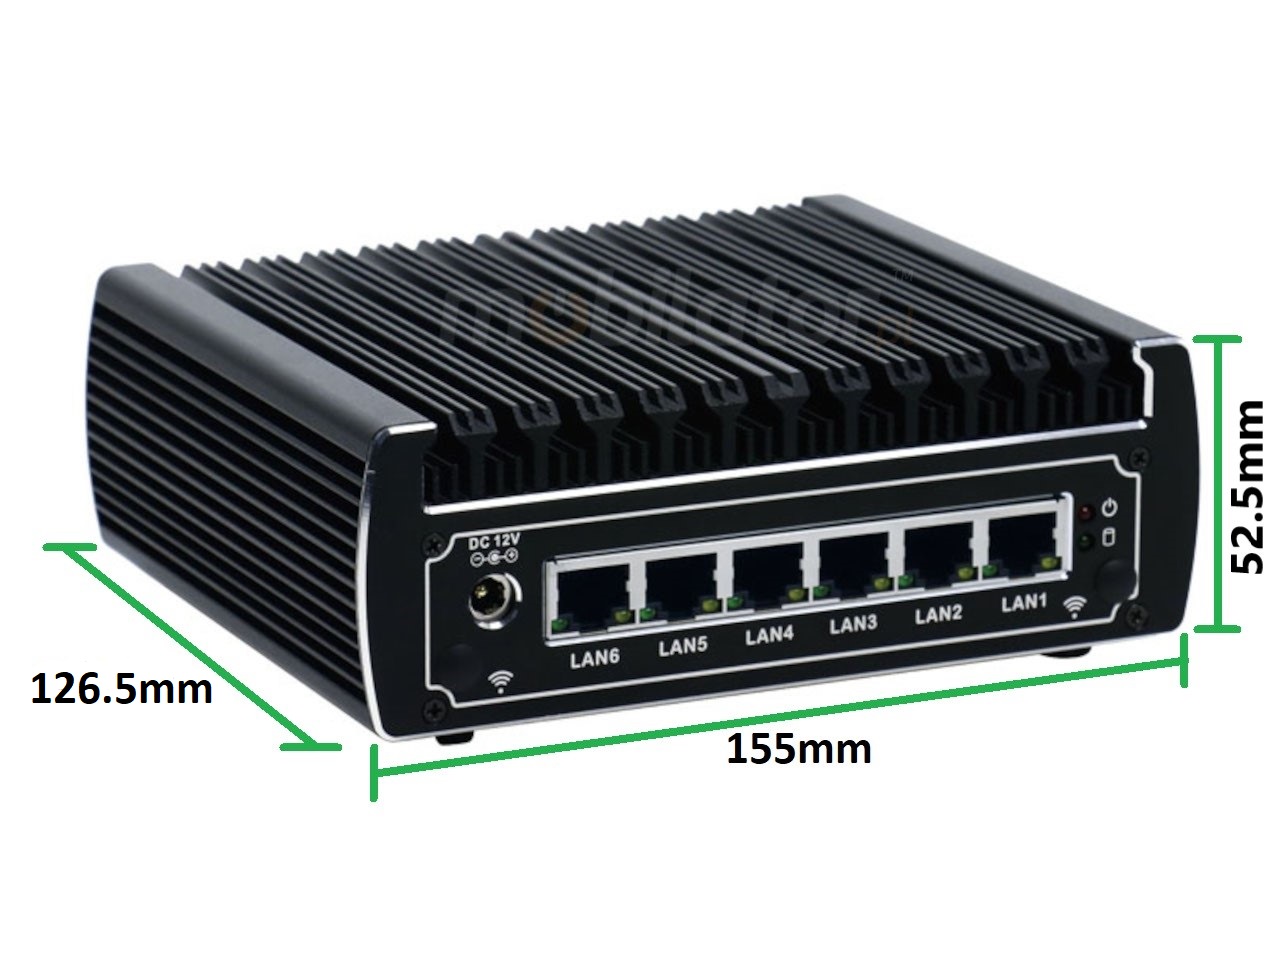  IBOX N133 v.4, size, industrial small fast reliable intel fanless industrial small LAN INTEL i3 SSD DDR4